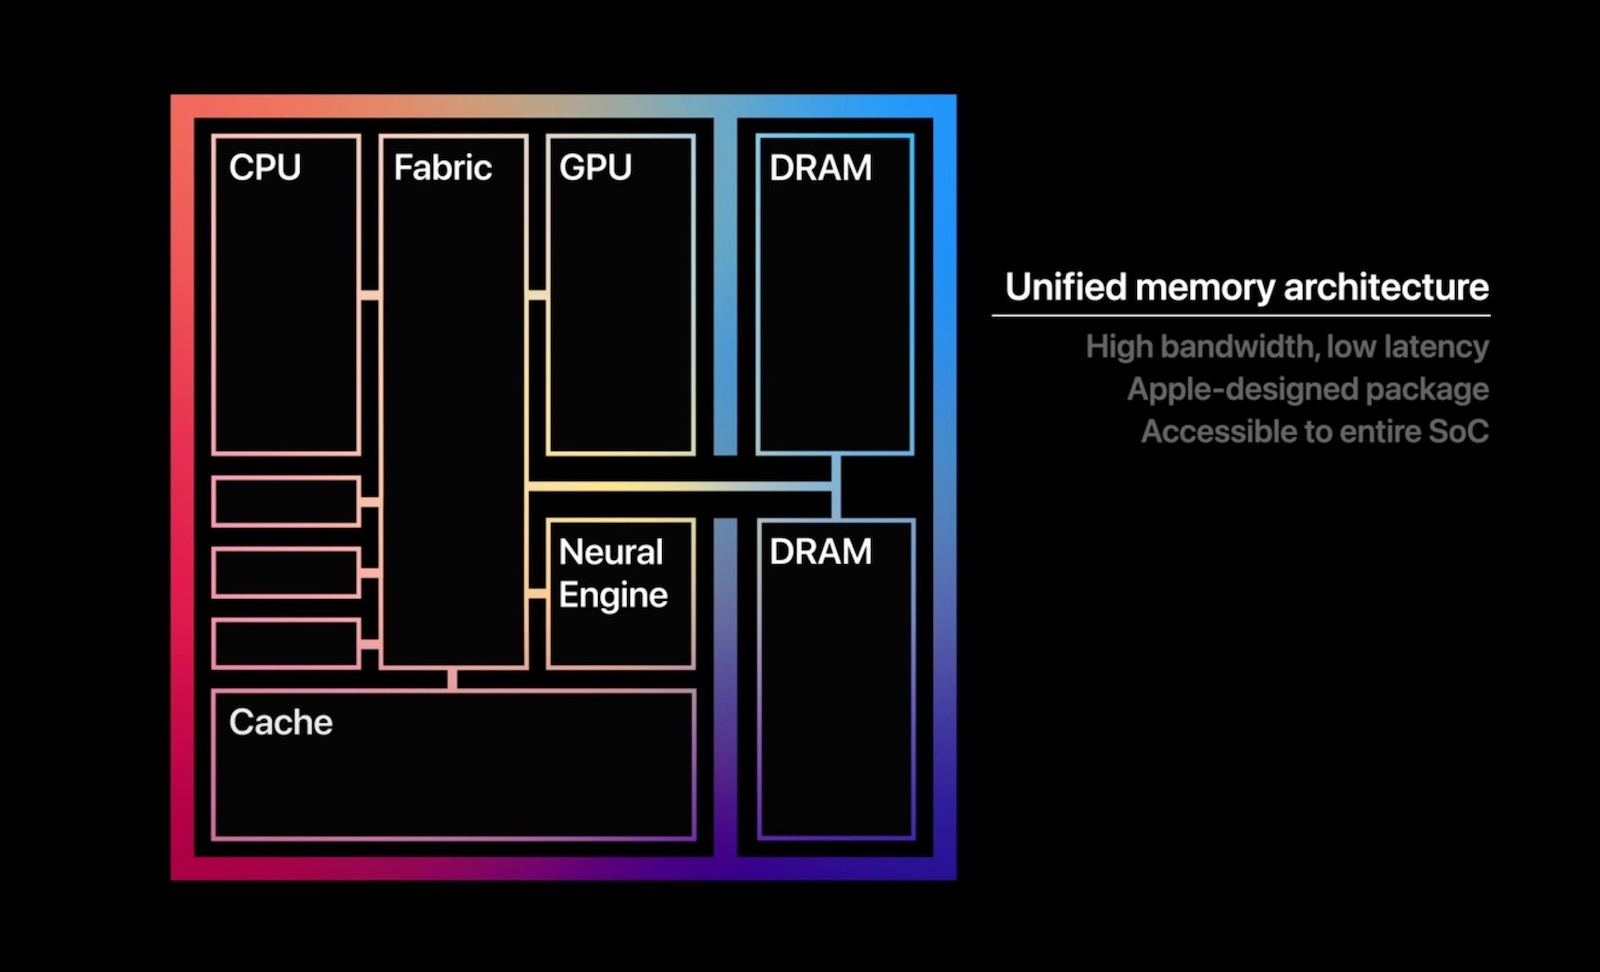 Unified memory architechture